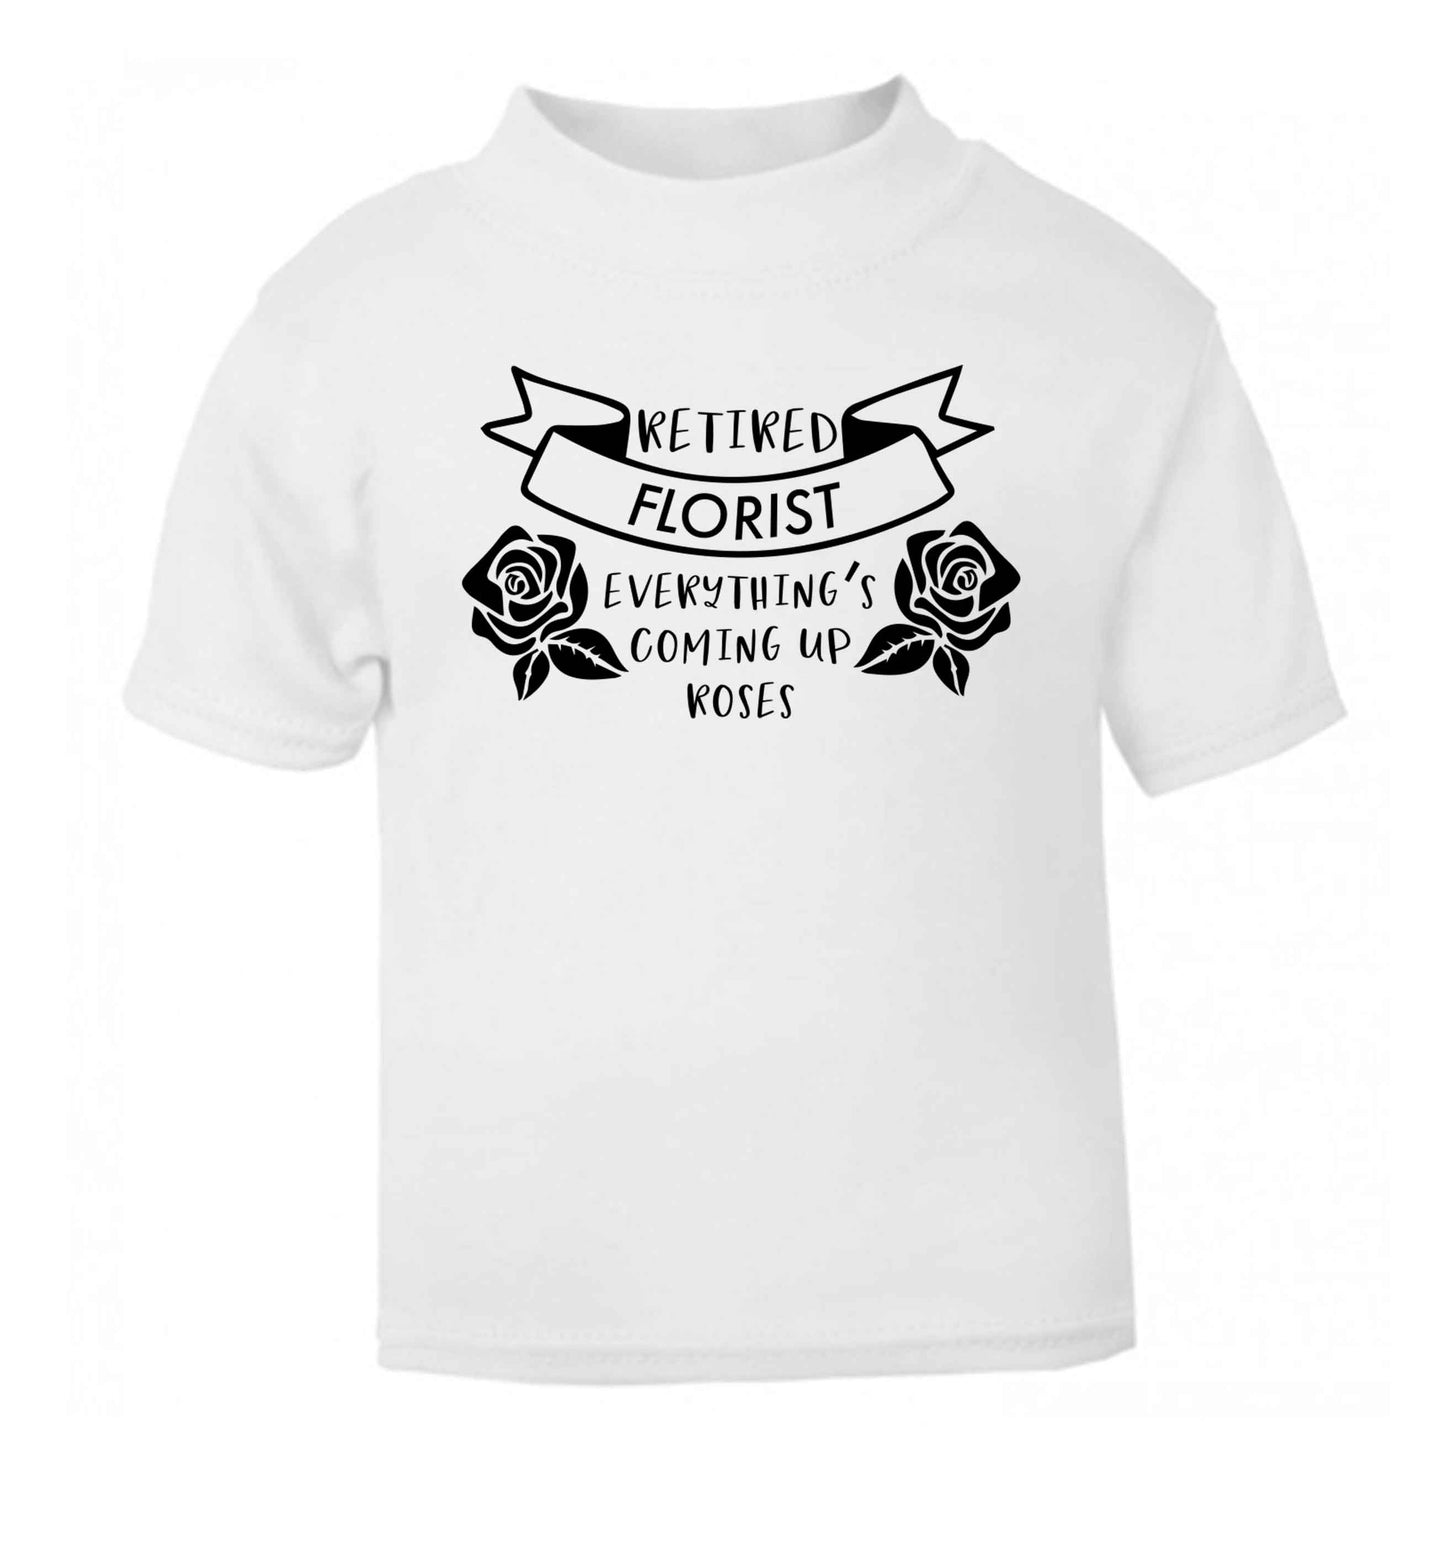 Retired florist everything's coming up roses white Baby Toddler Tshirt 2 Years